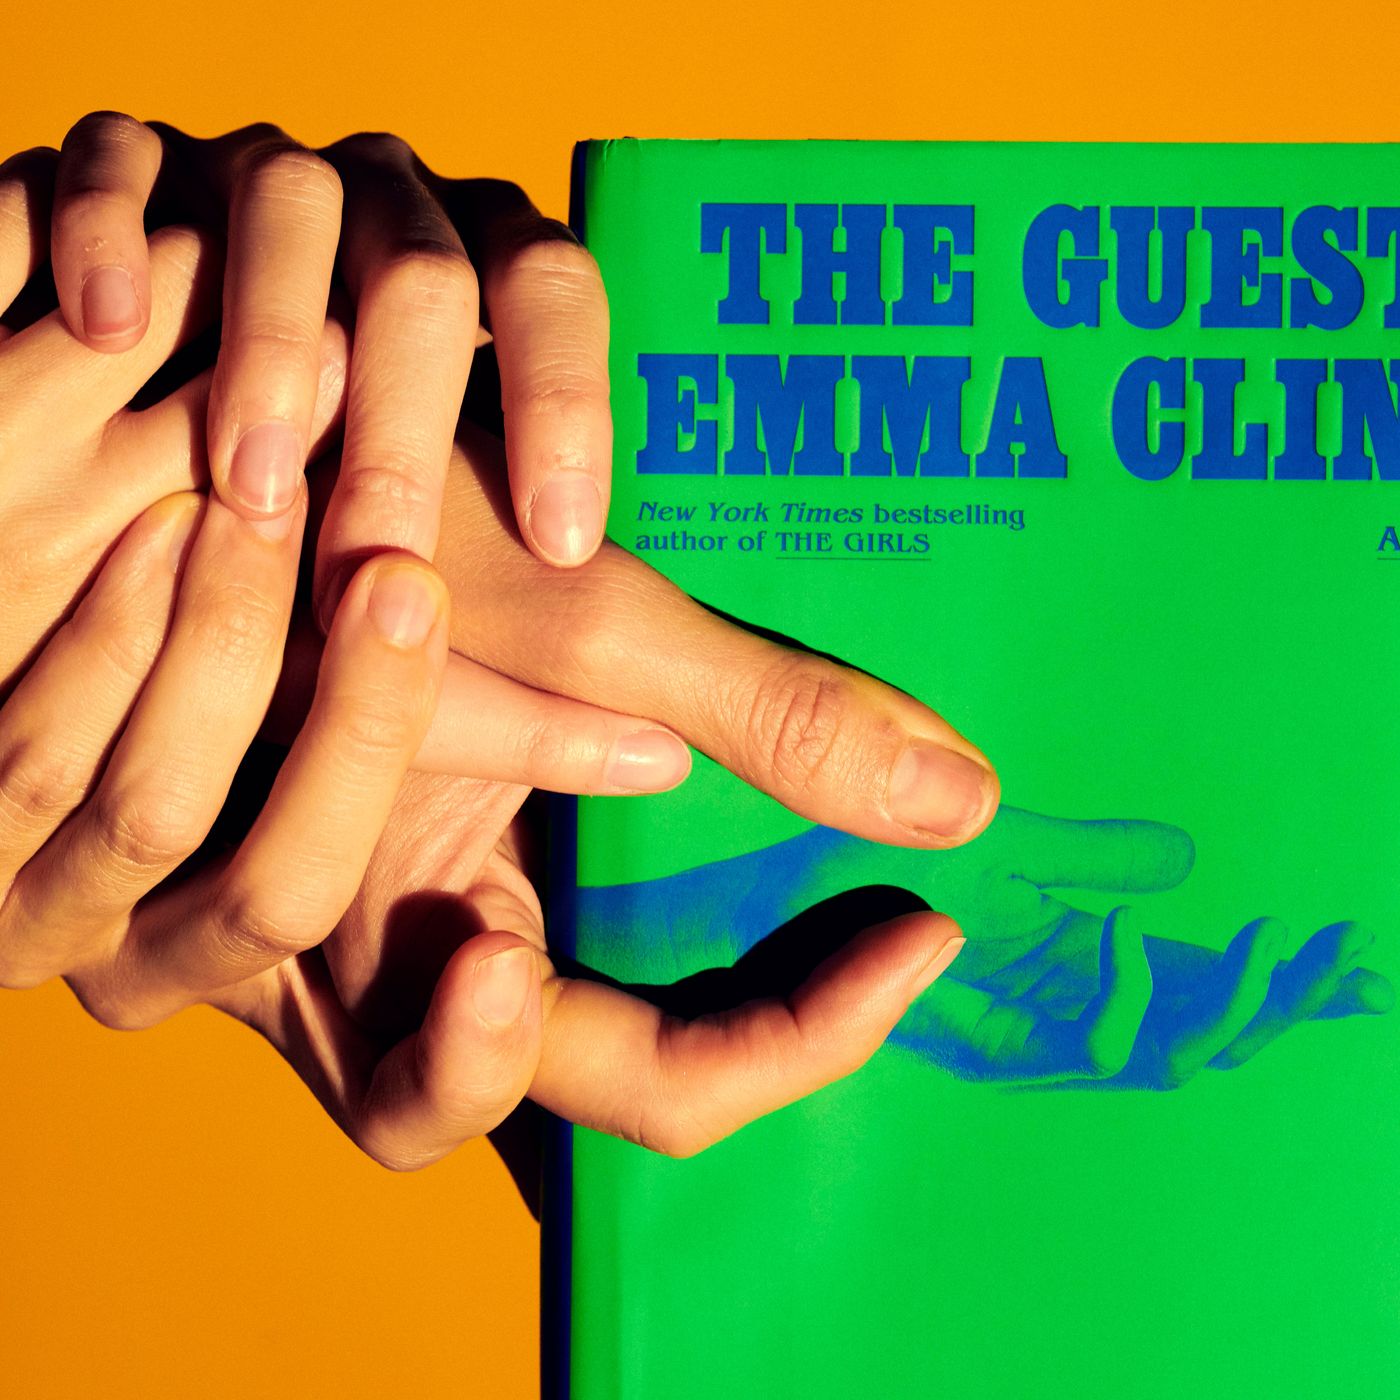 Discussing Emma Clines The Guest, Chapters 9 through 11 image